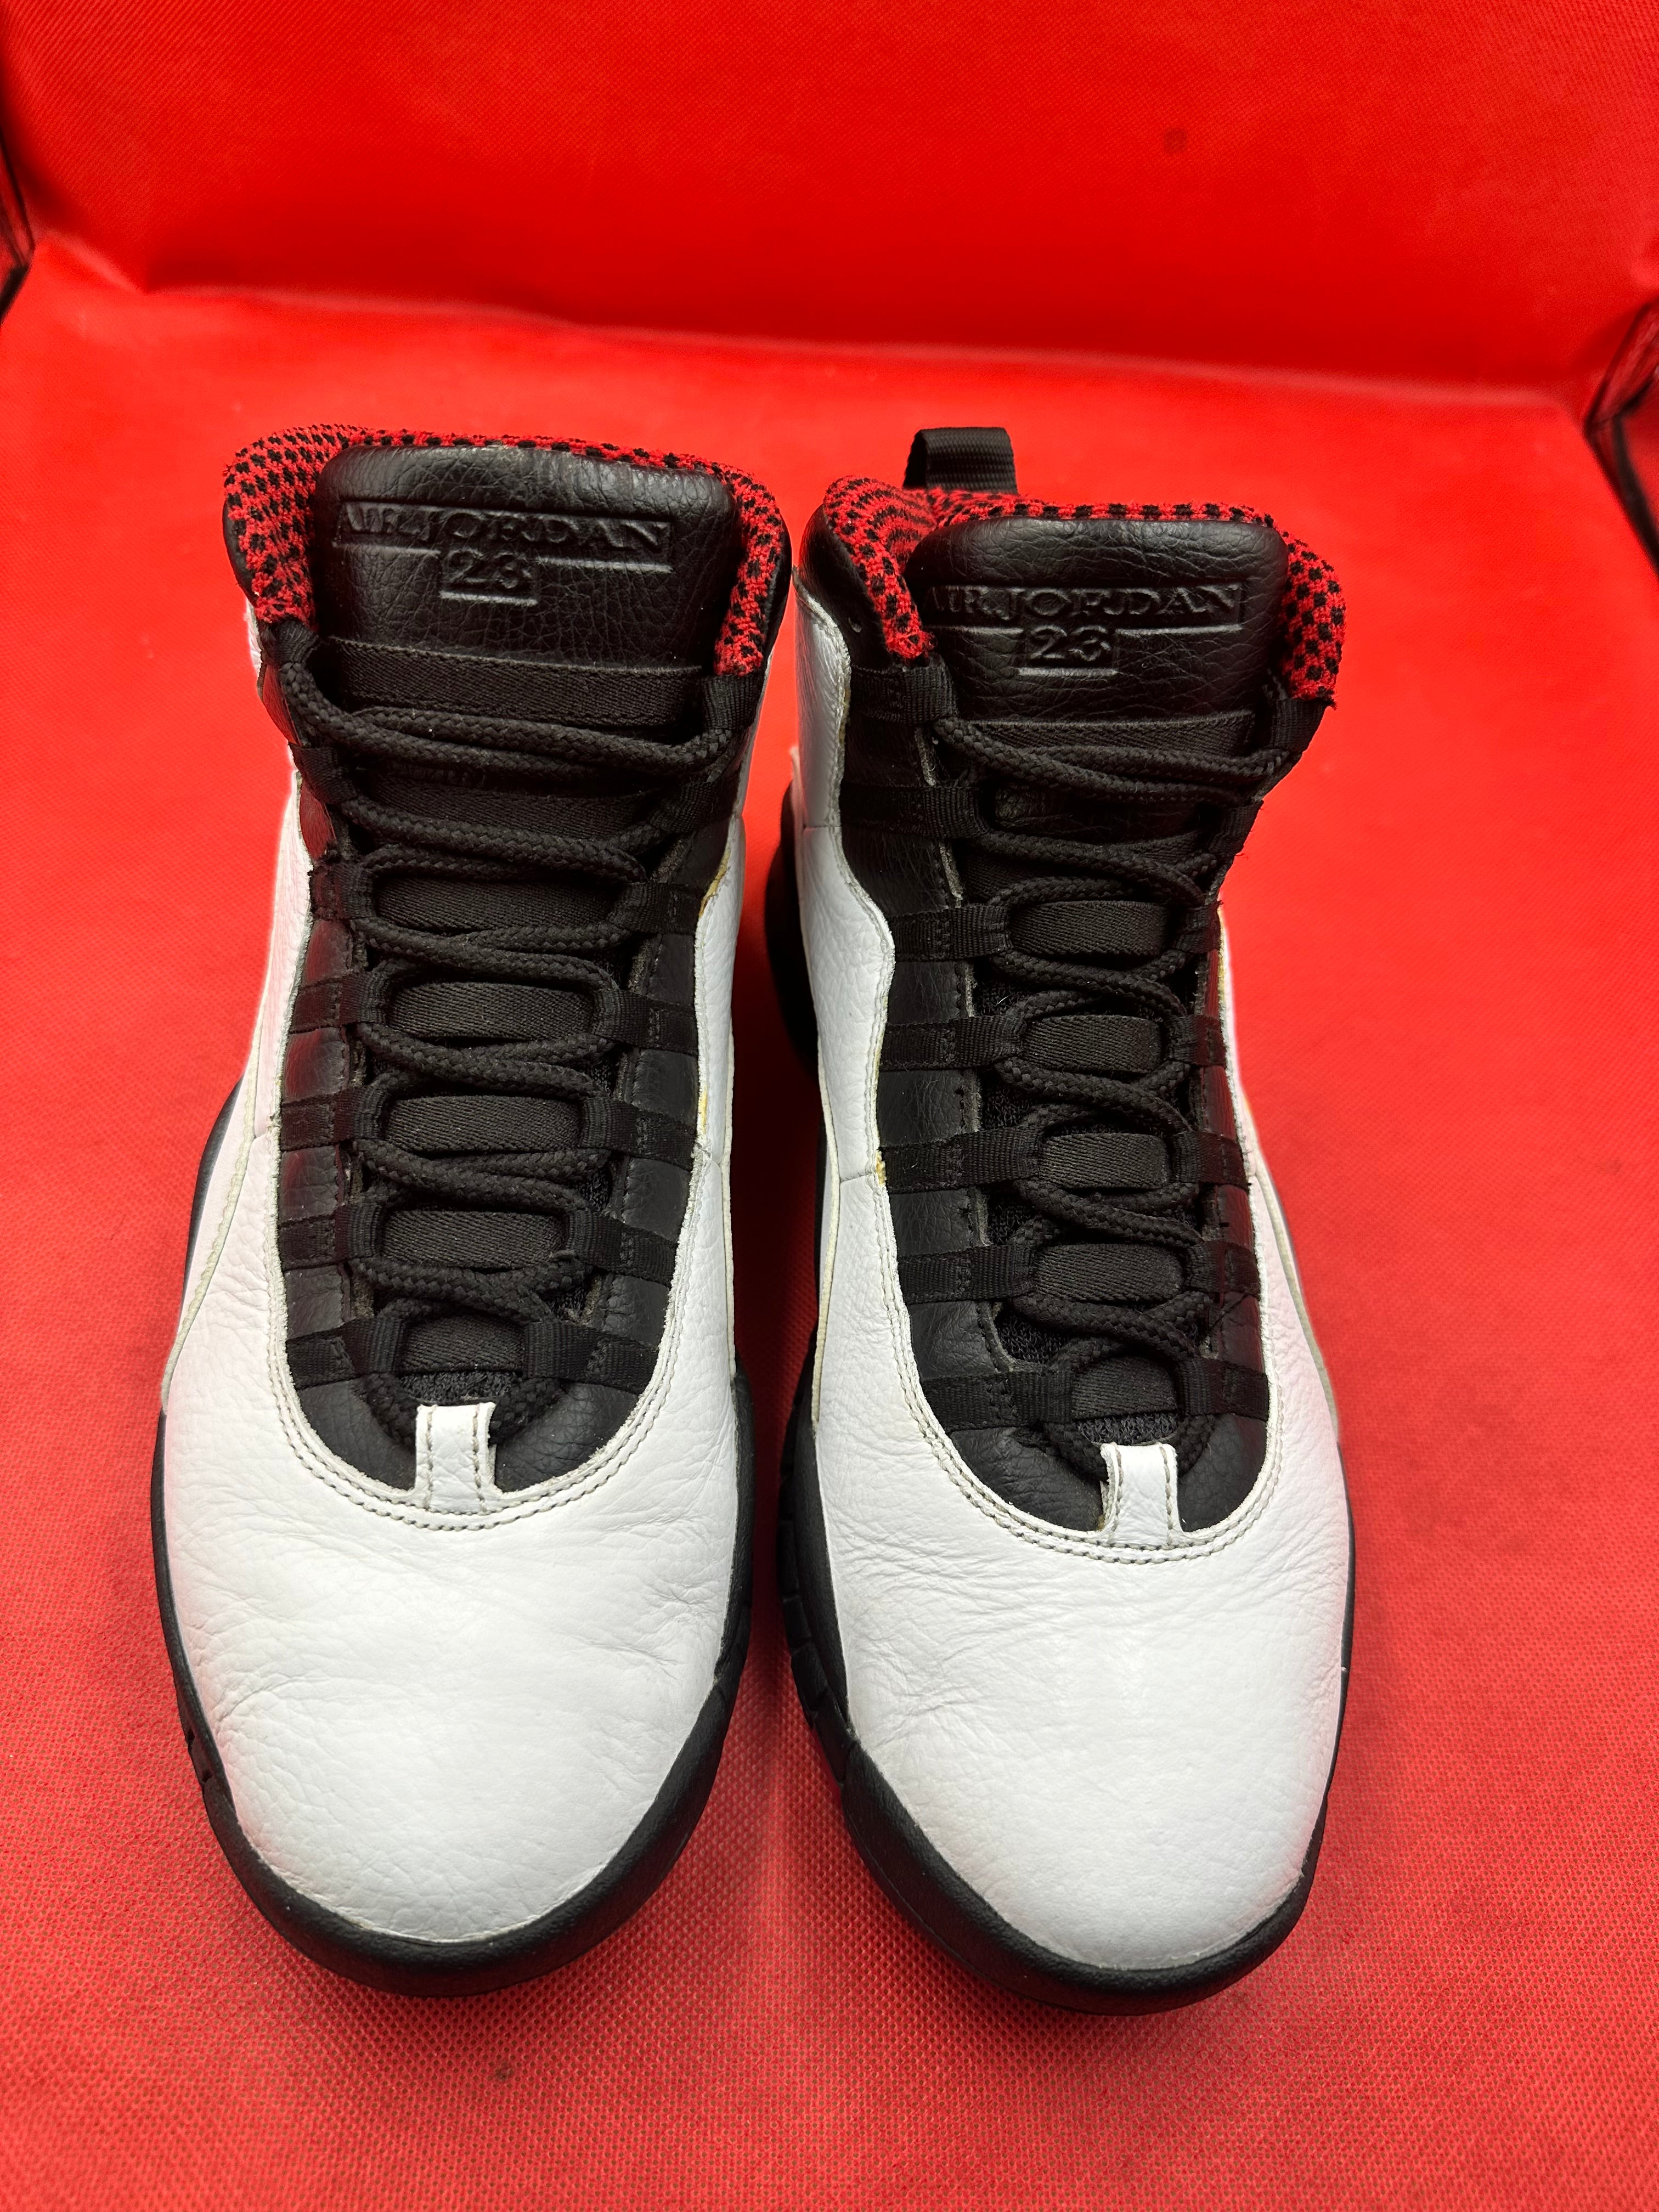 Chicago 10s size 9